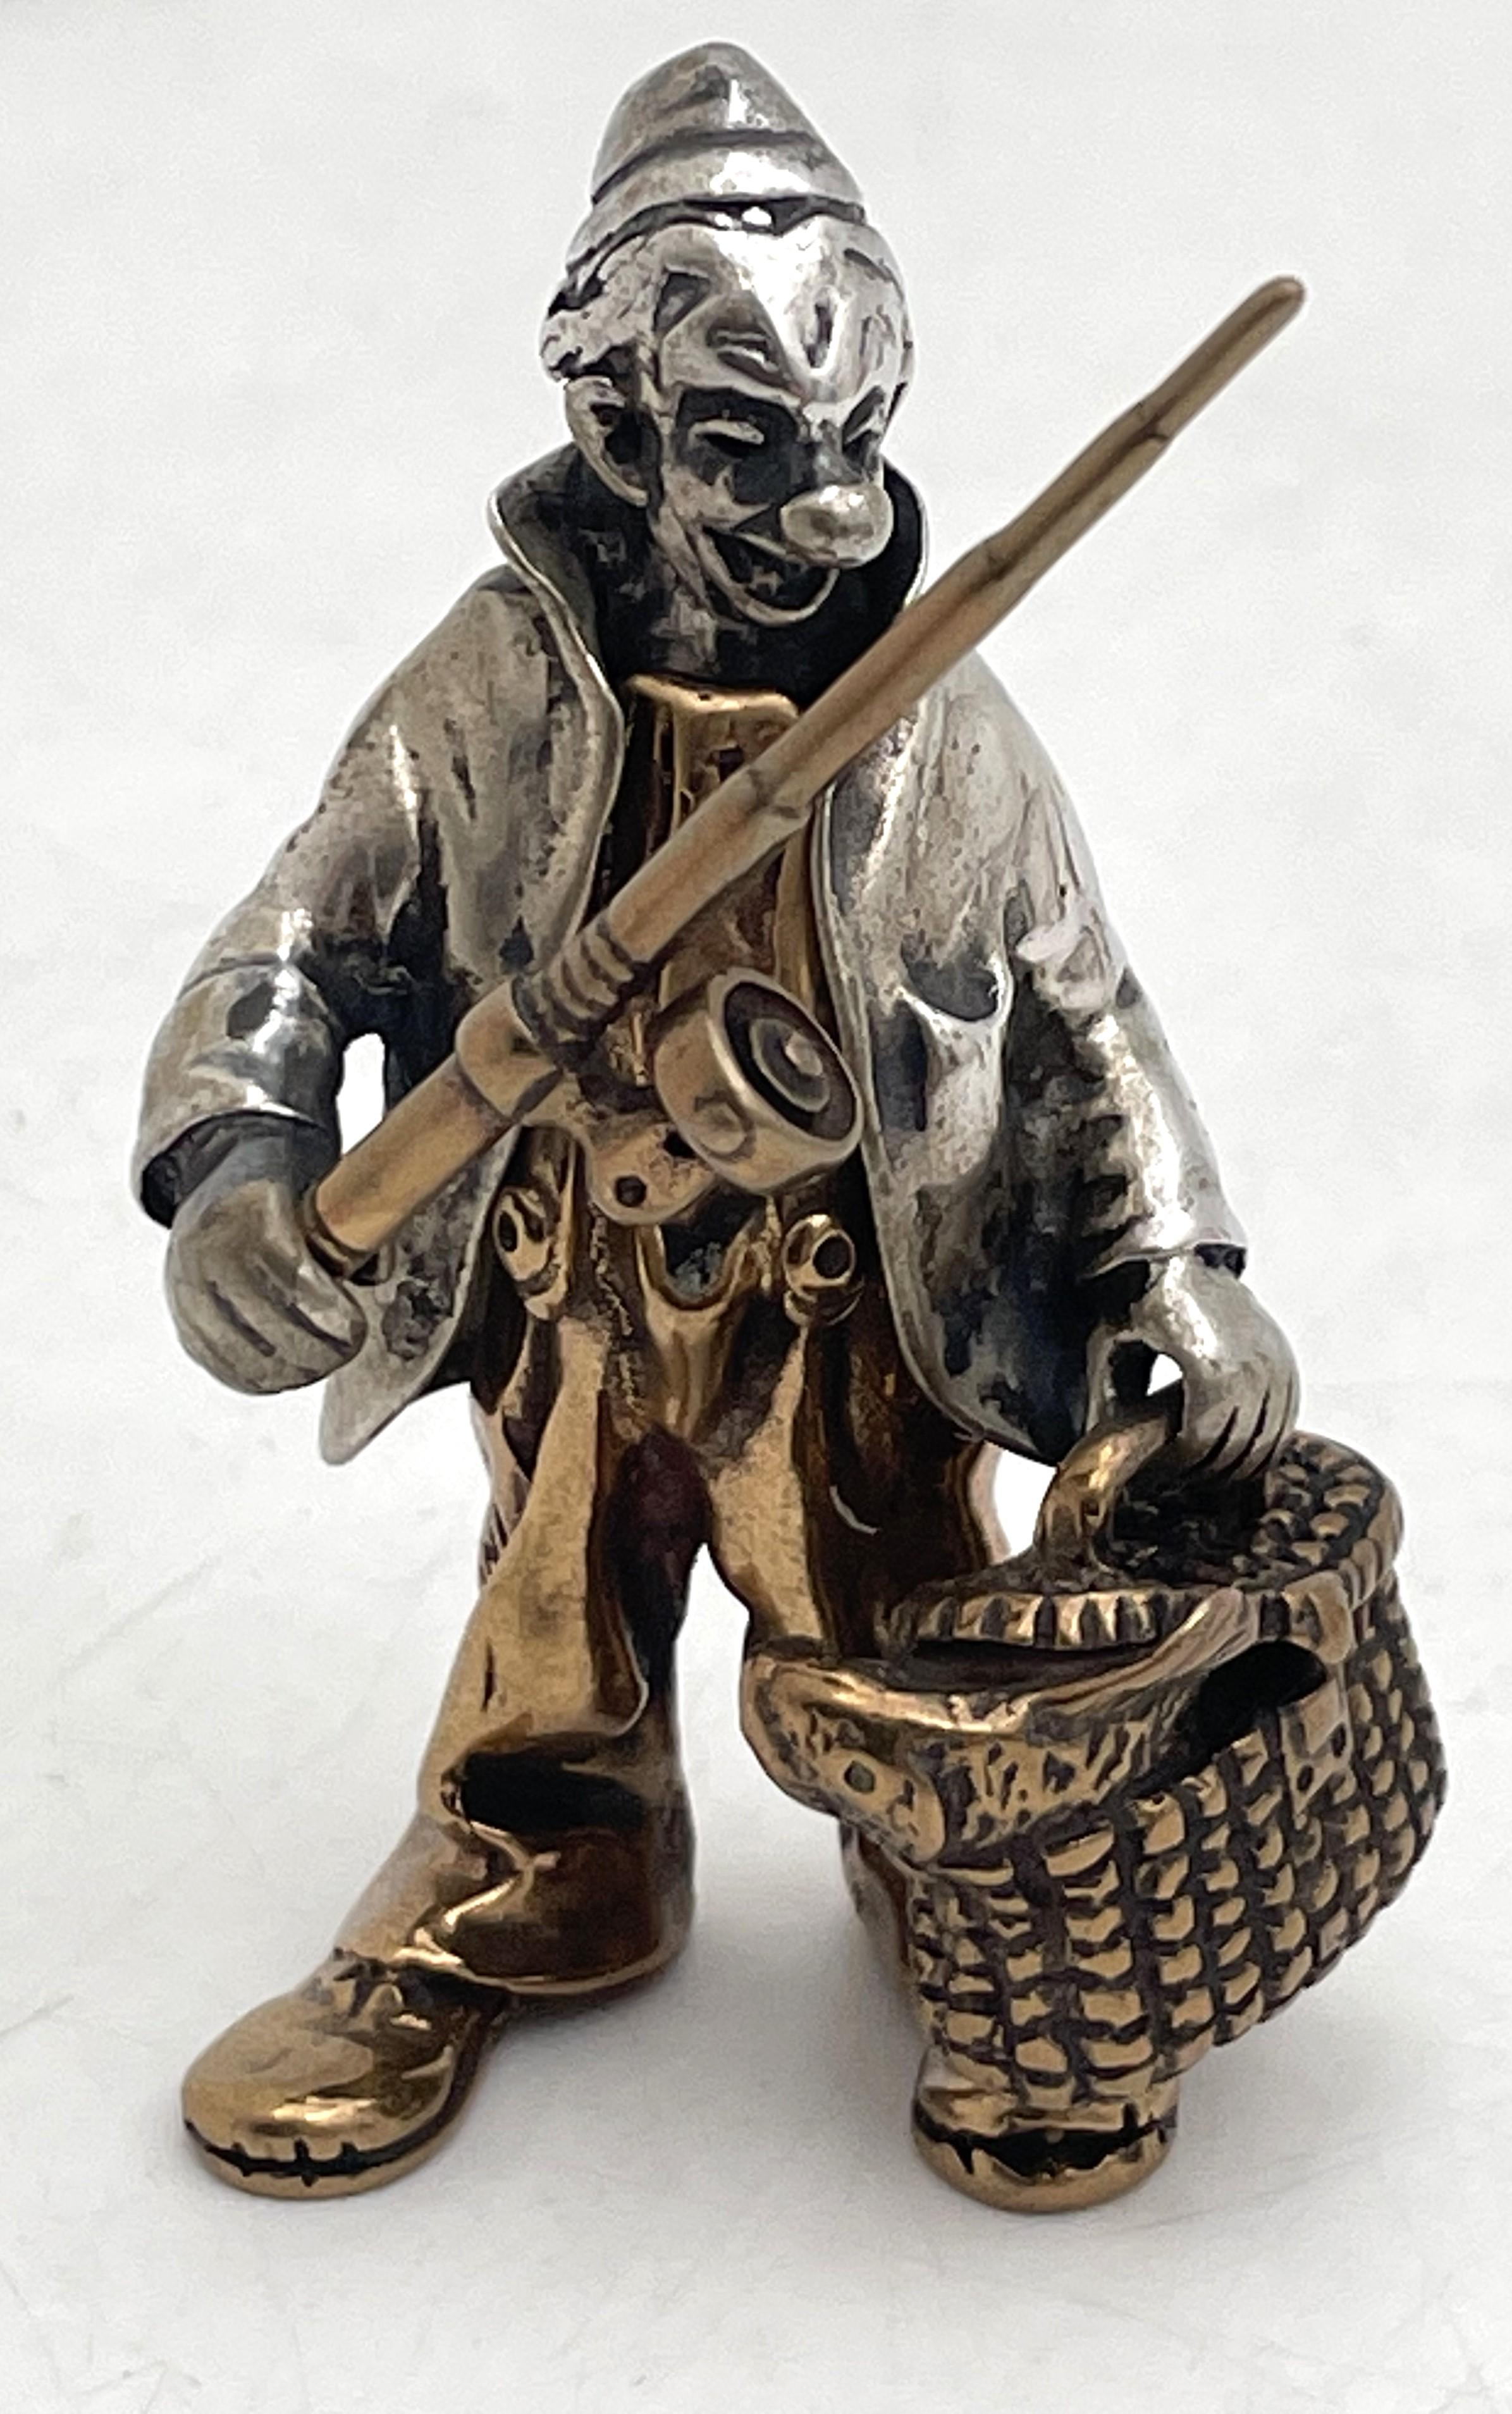 Comparable to the circus set from Tiffany & Co., these 3 Italian mixed metal (including silver) circus clowns sculptures/ miniature figurines from the mid-20th century are very realistic and showcase amusing expressions and props. They measure